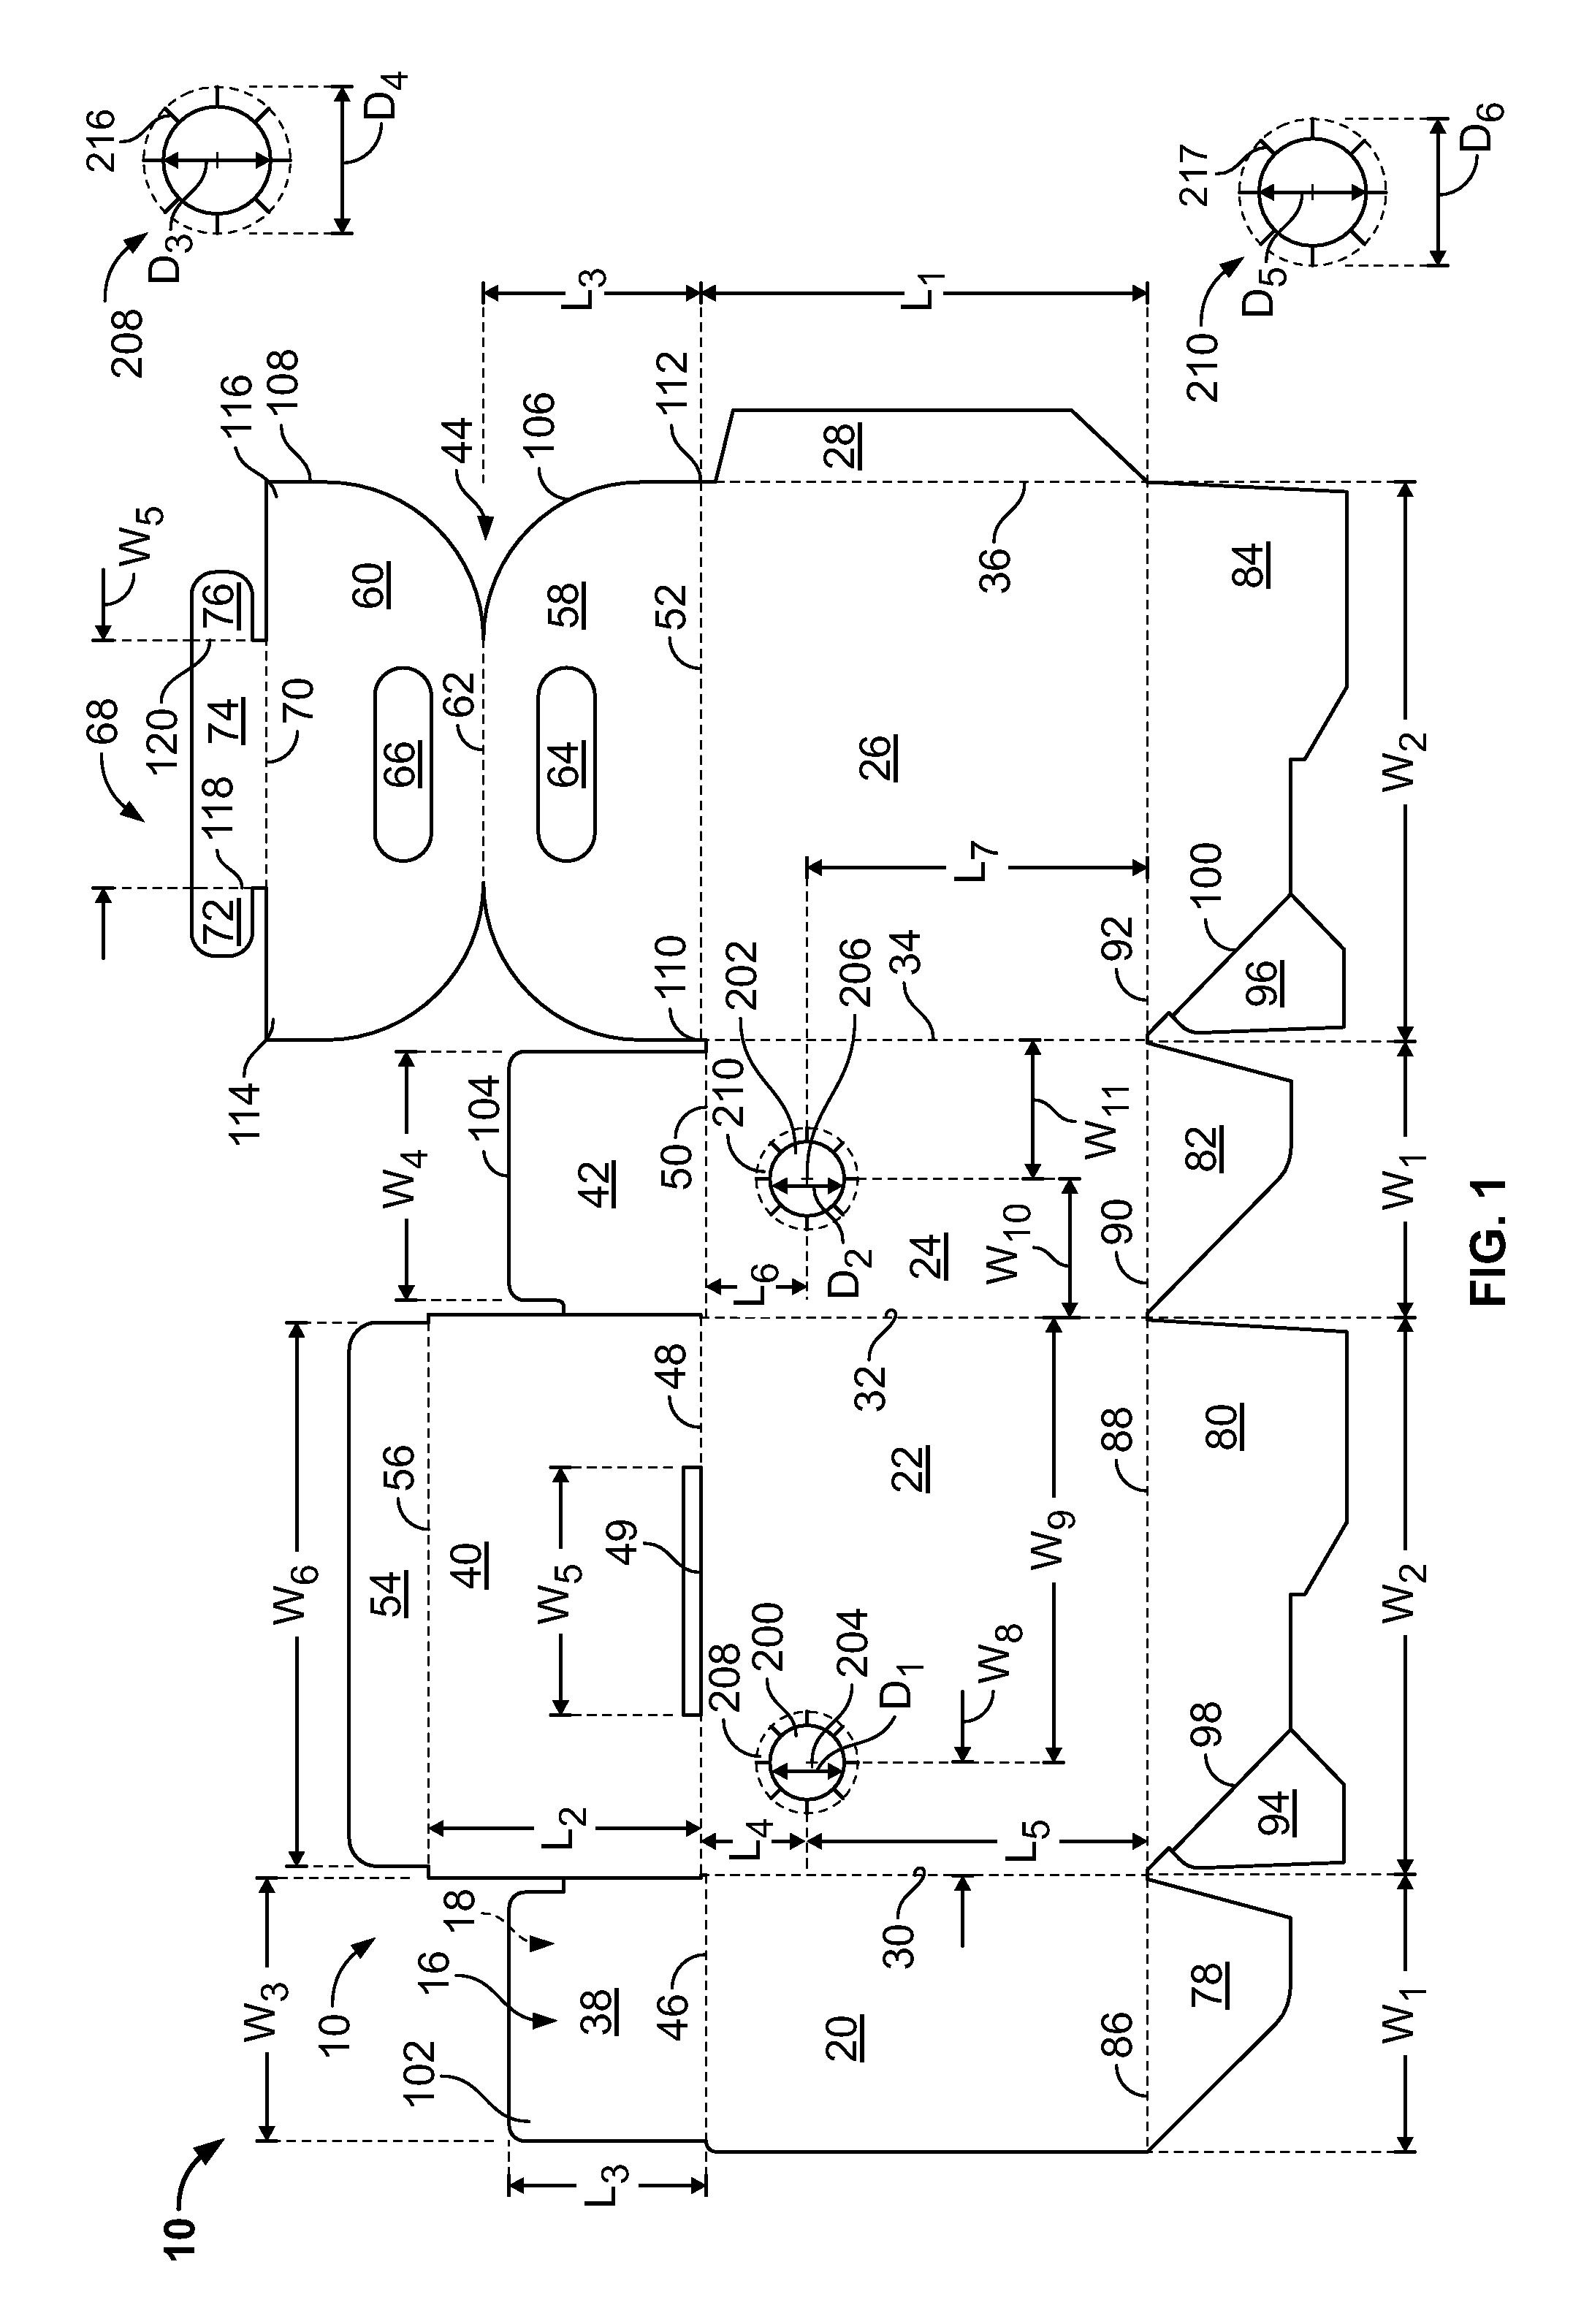 Bag-in-box container and method of constructing the same